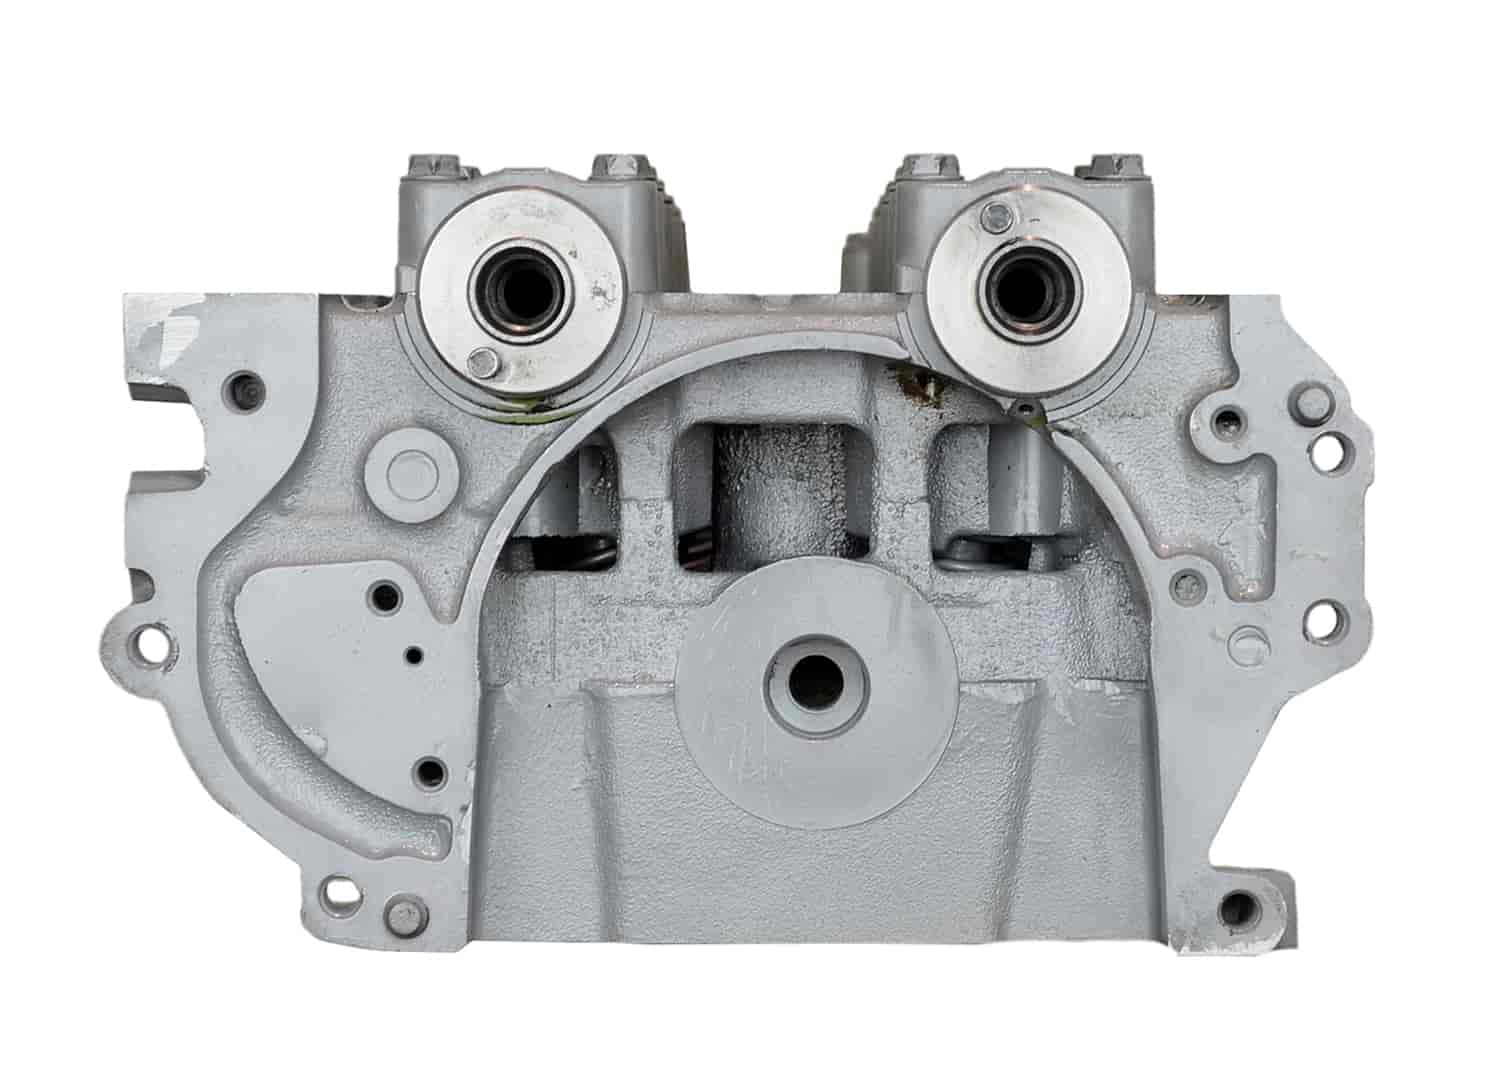 Remanufactured Cylinder Head for 1999-2001 Nissan Altima with